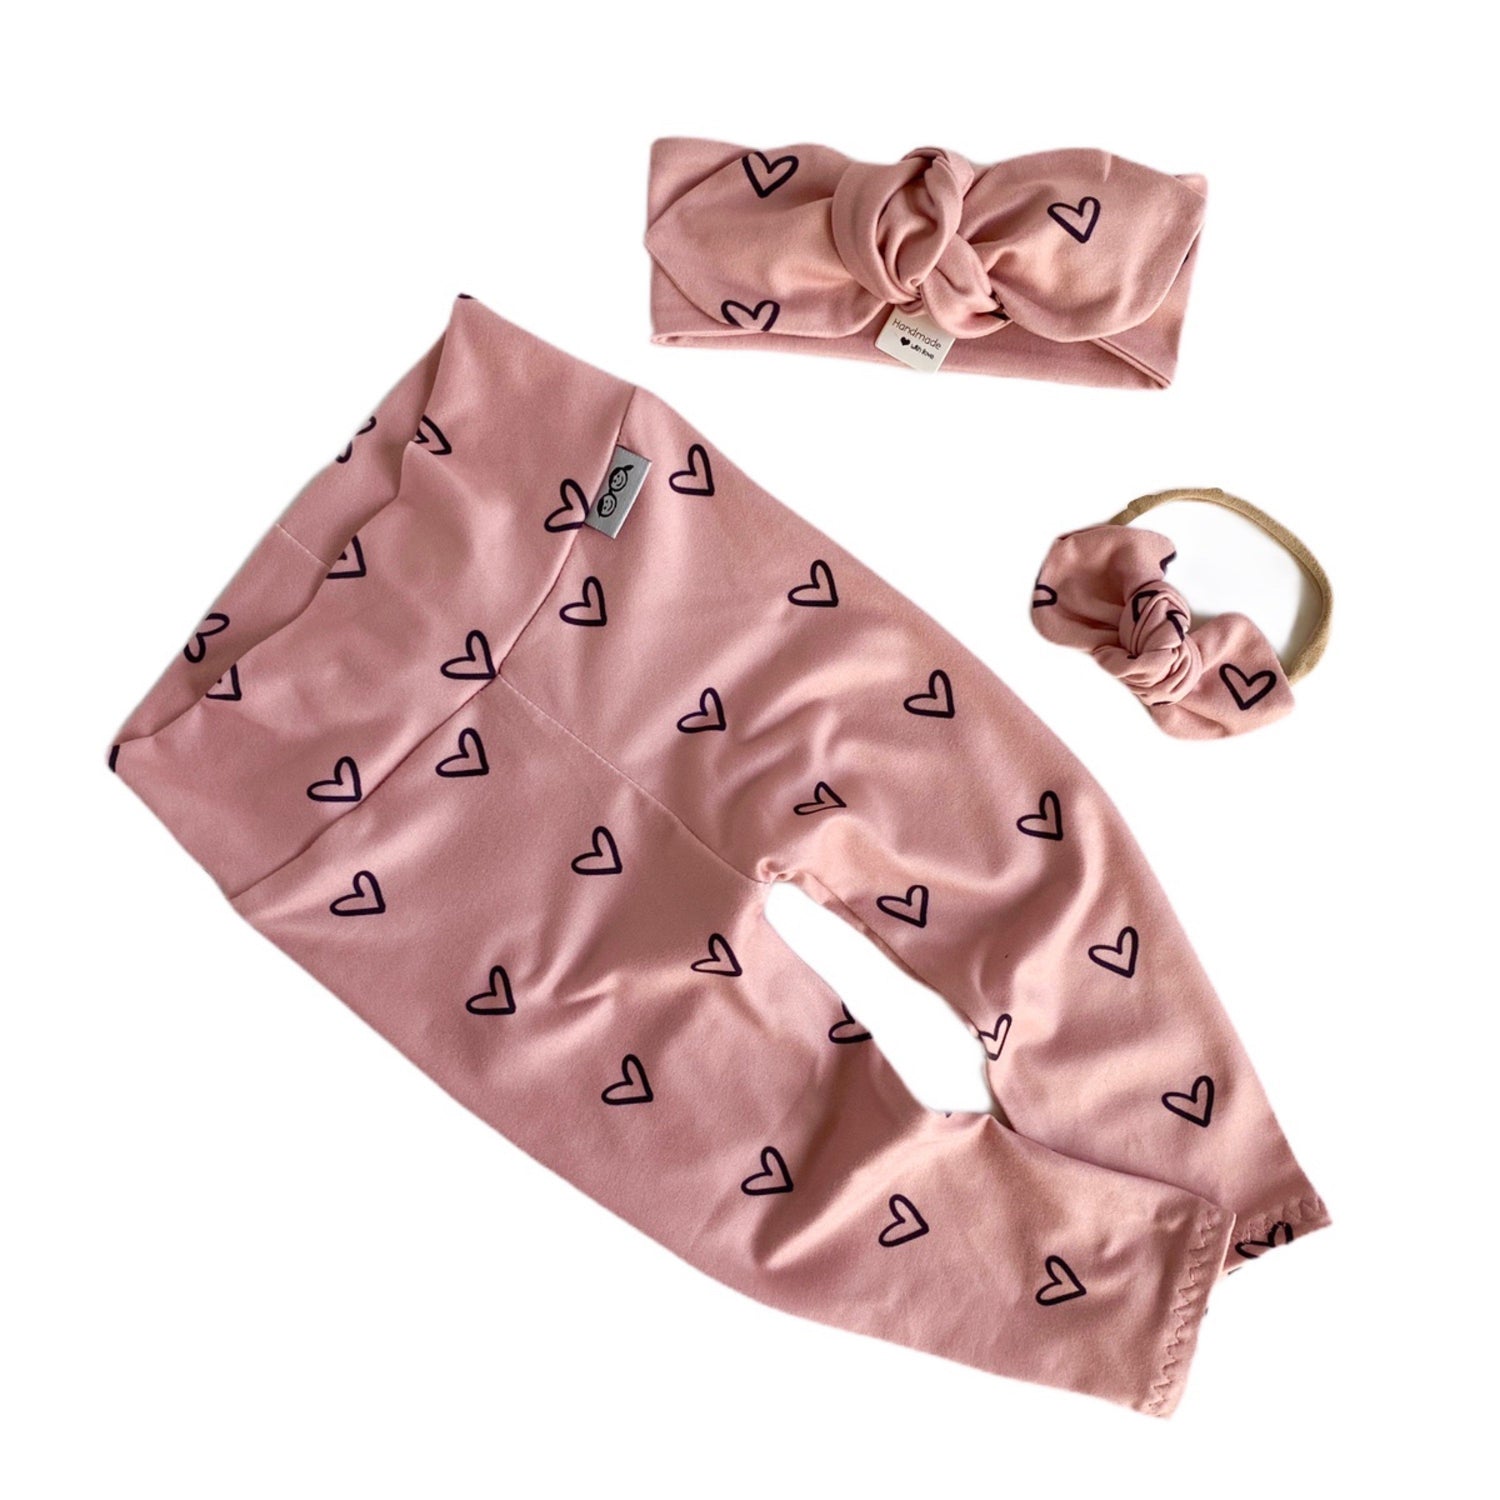 Black Hearts on Dusty Pink Leggings and/or Headbands